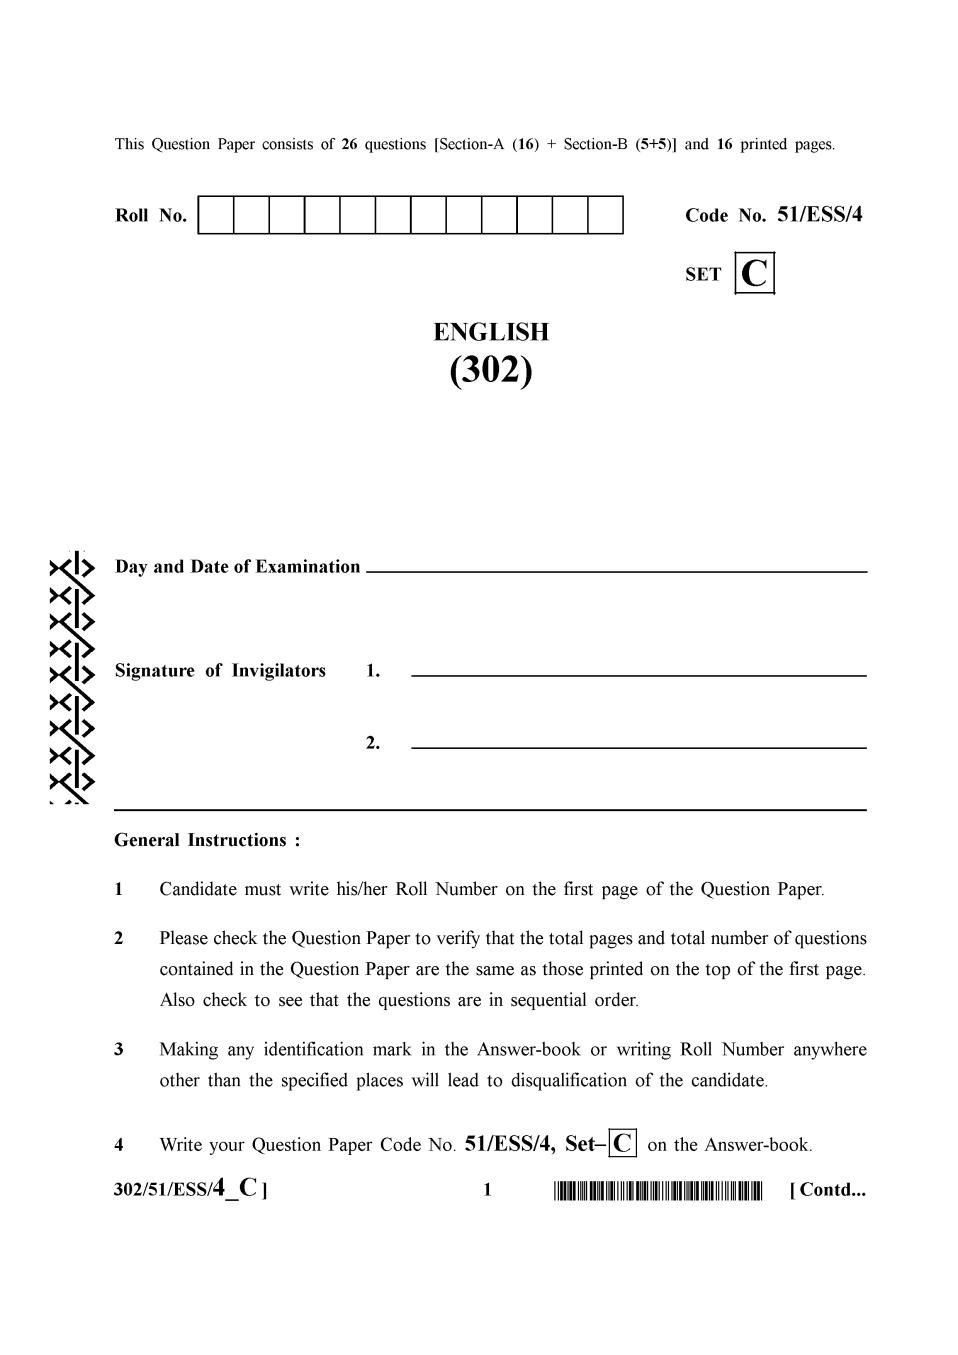 NIOS Class 12 Question Paper Oct 2015 - English - Page 1